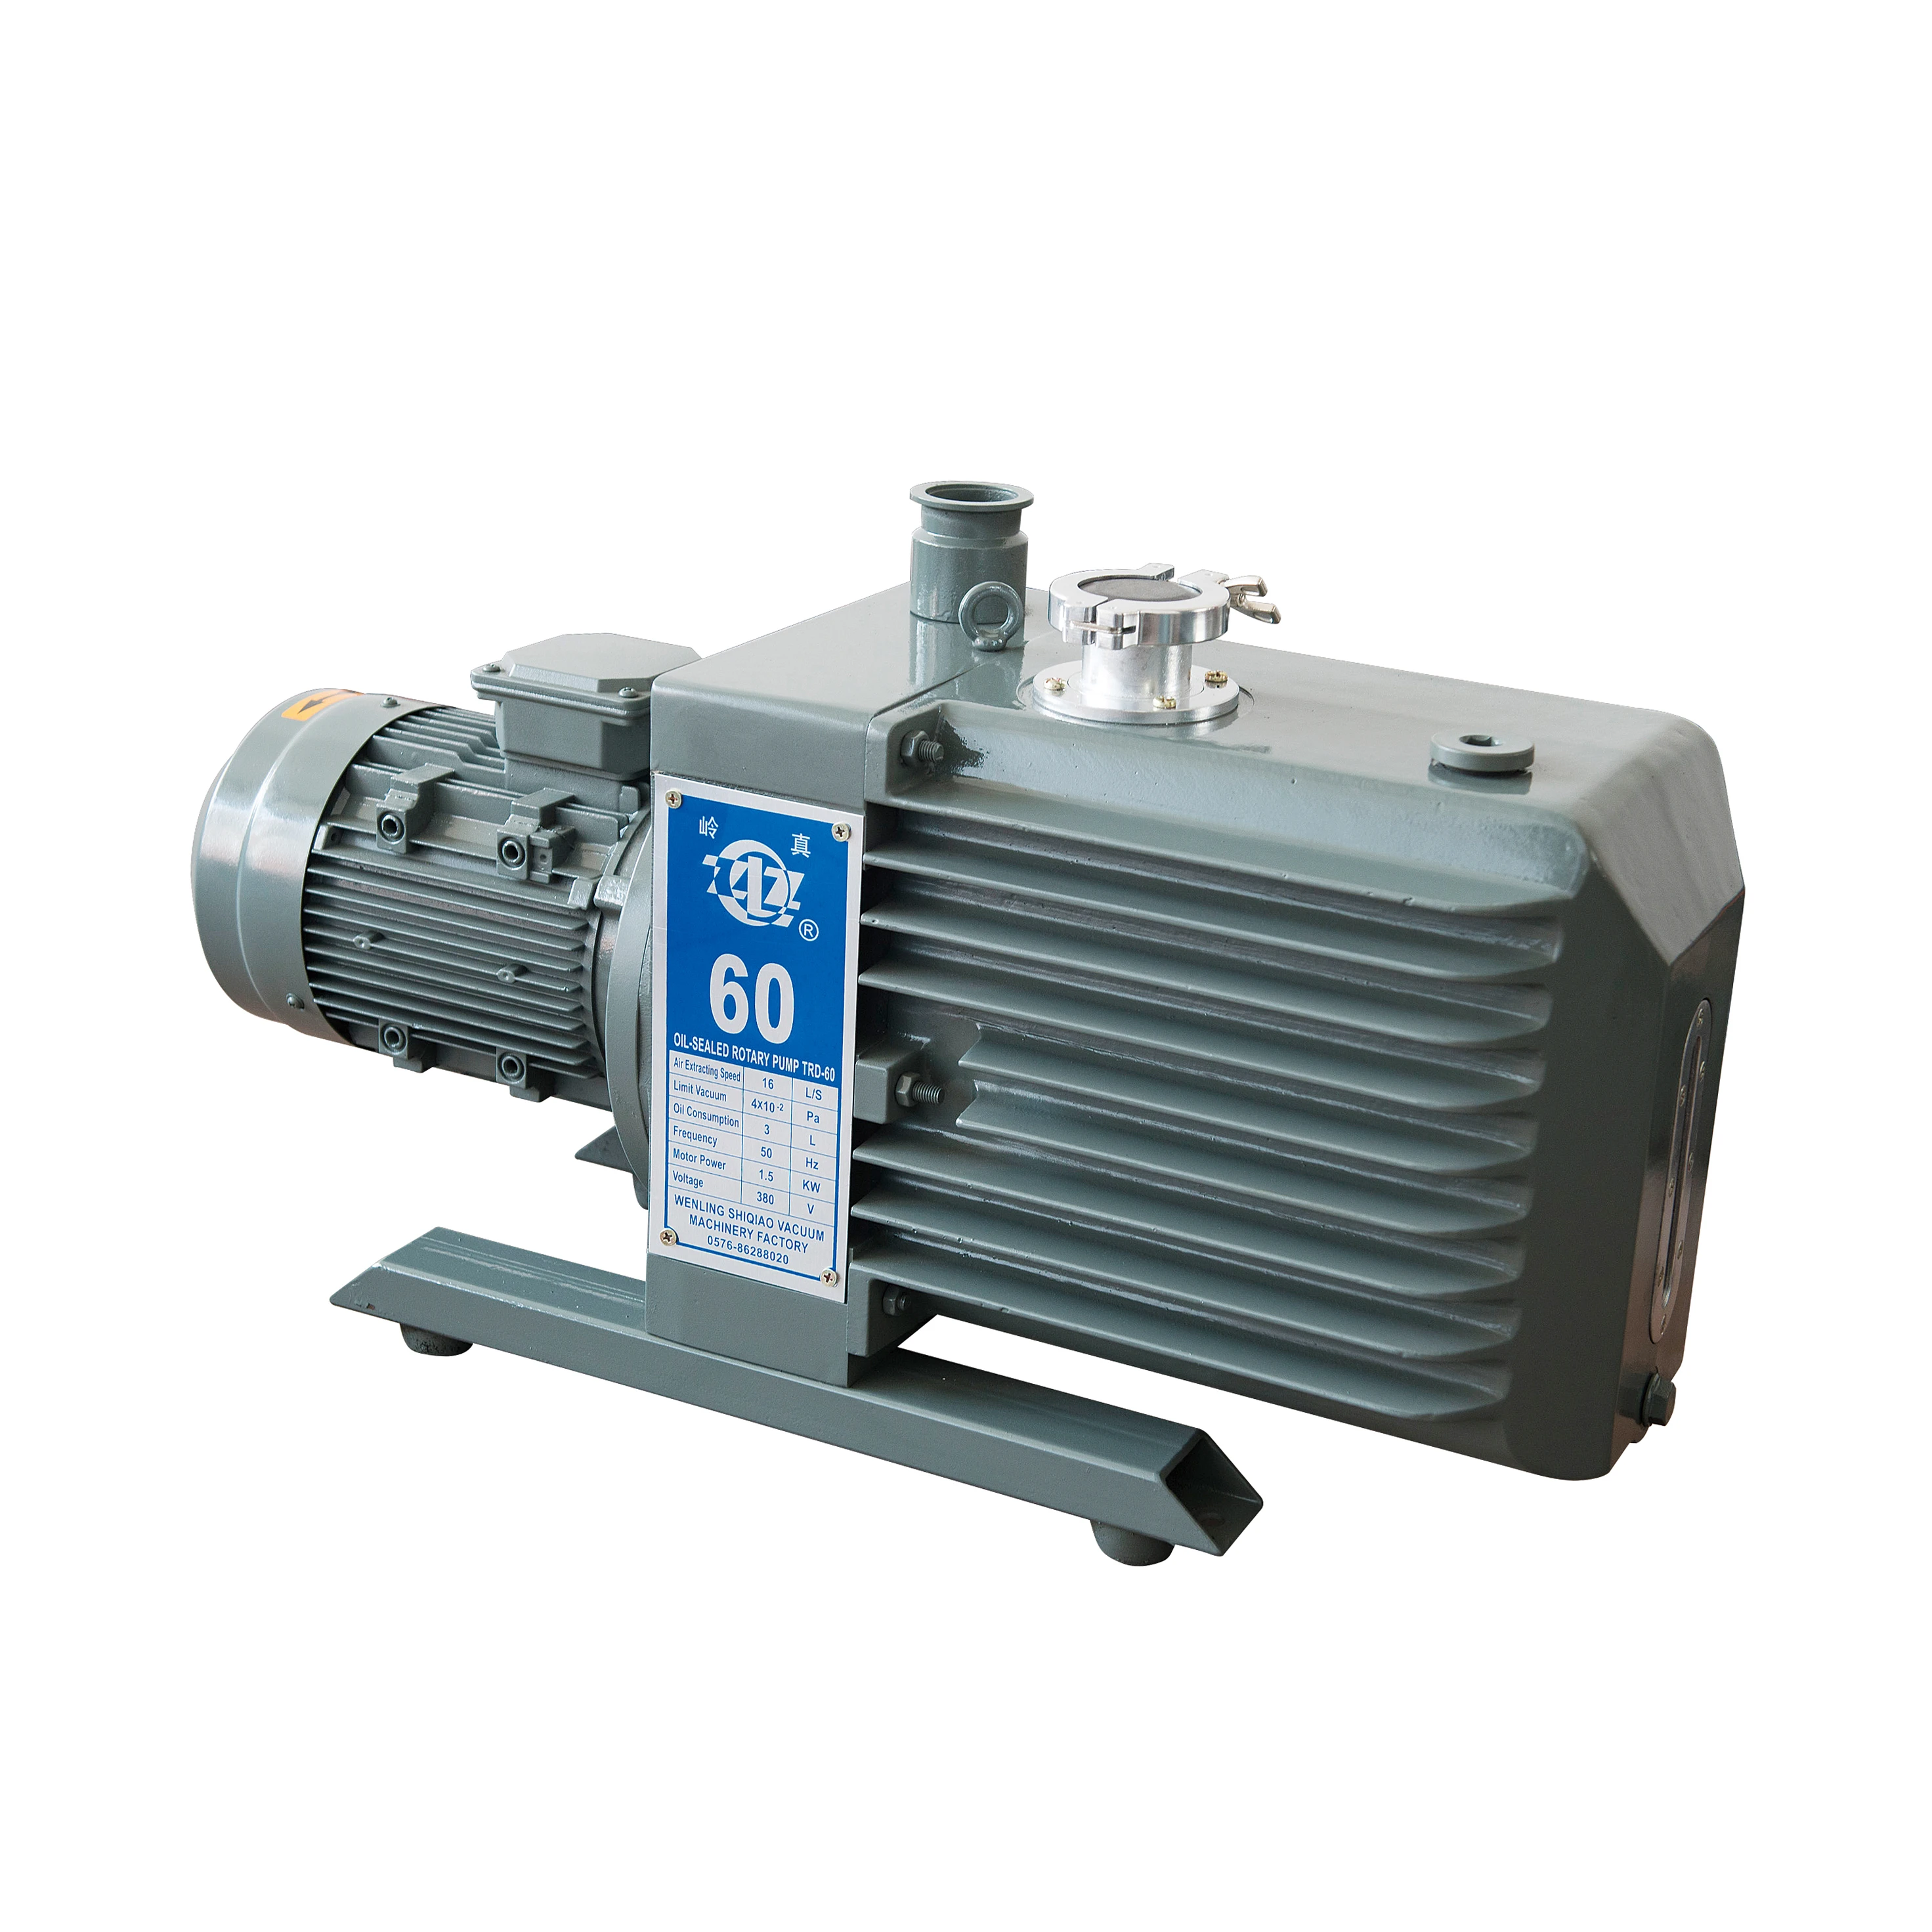 Direct-coupled Oil lubricated Rotary Vane Vacuum Pump Factory price